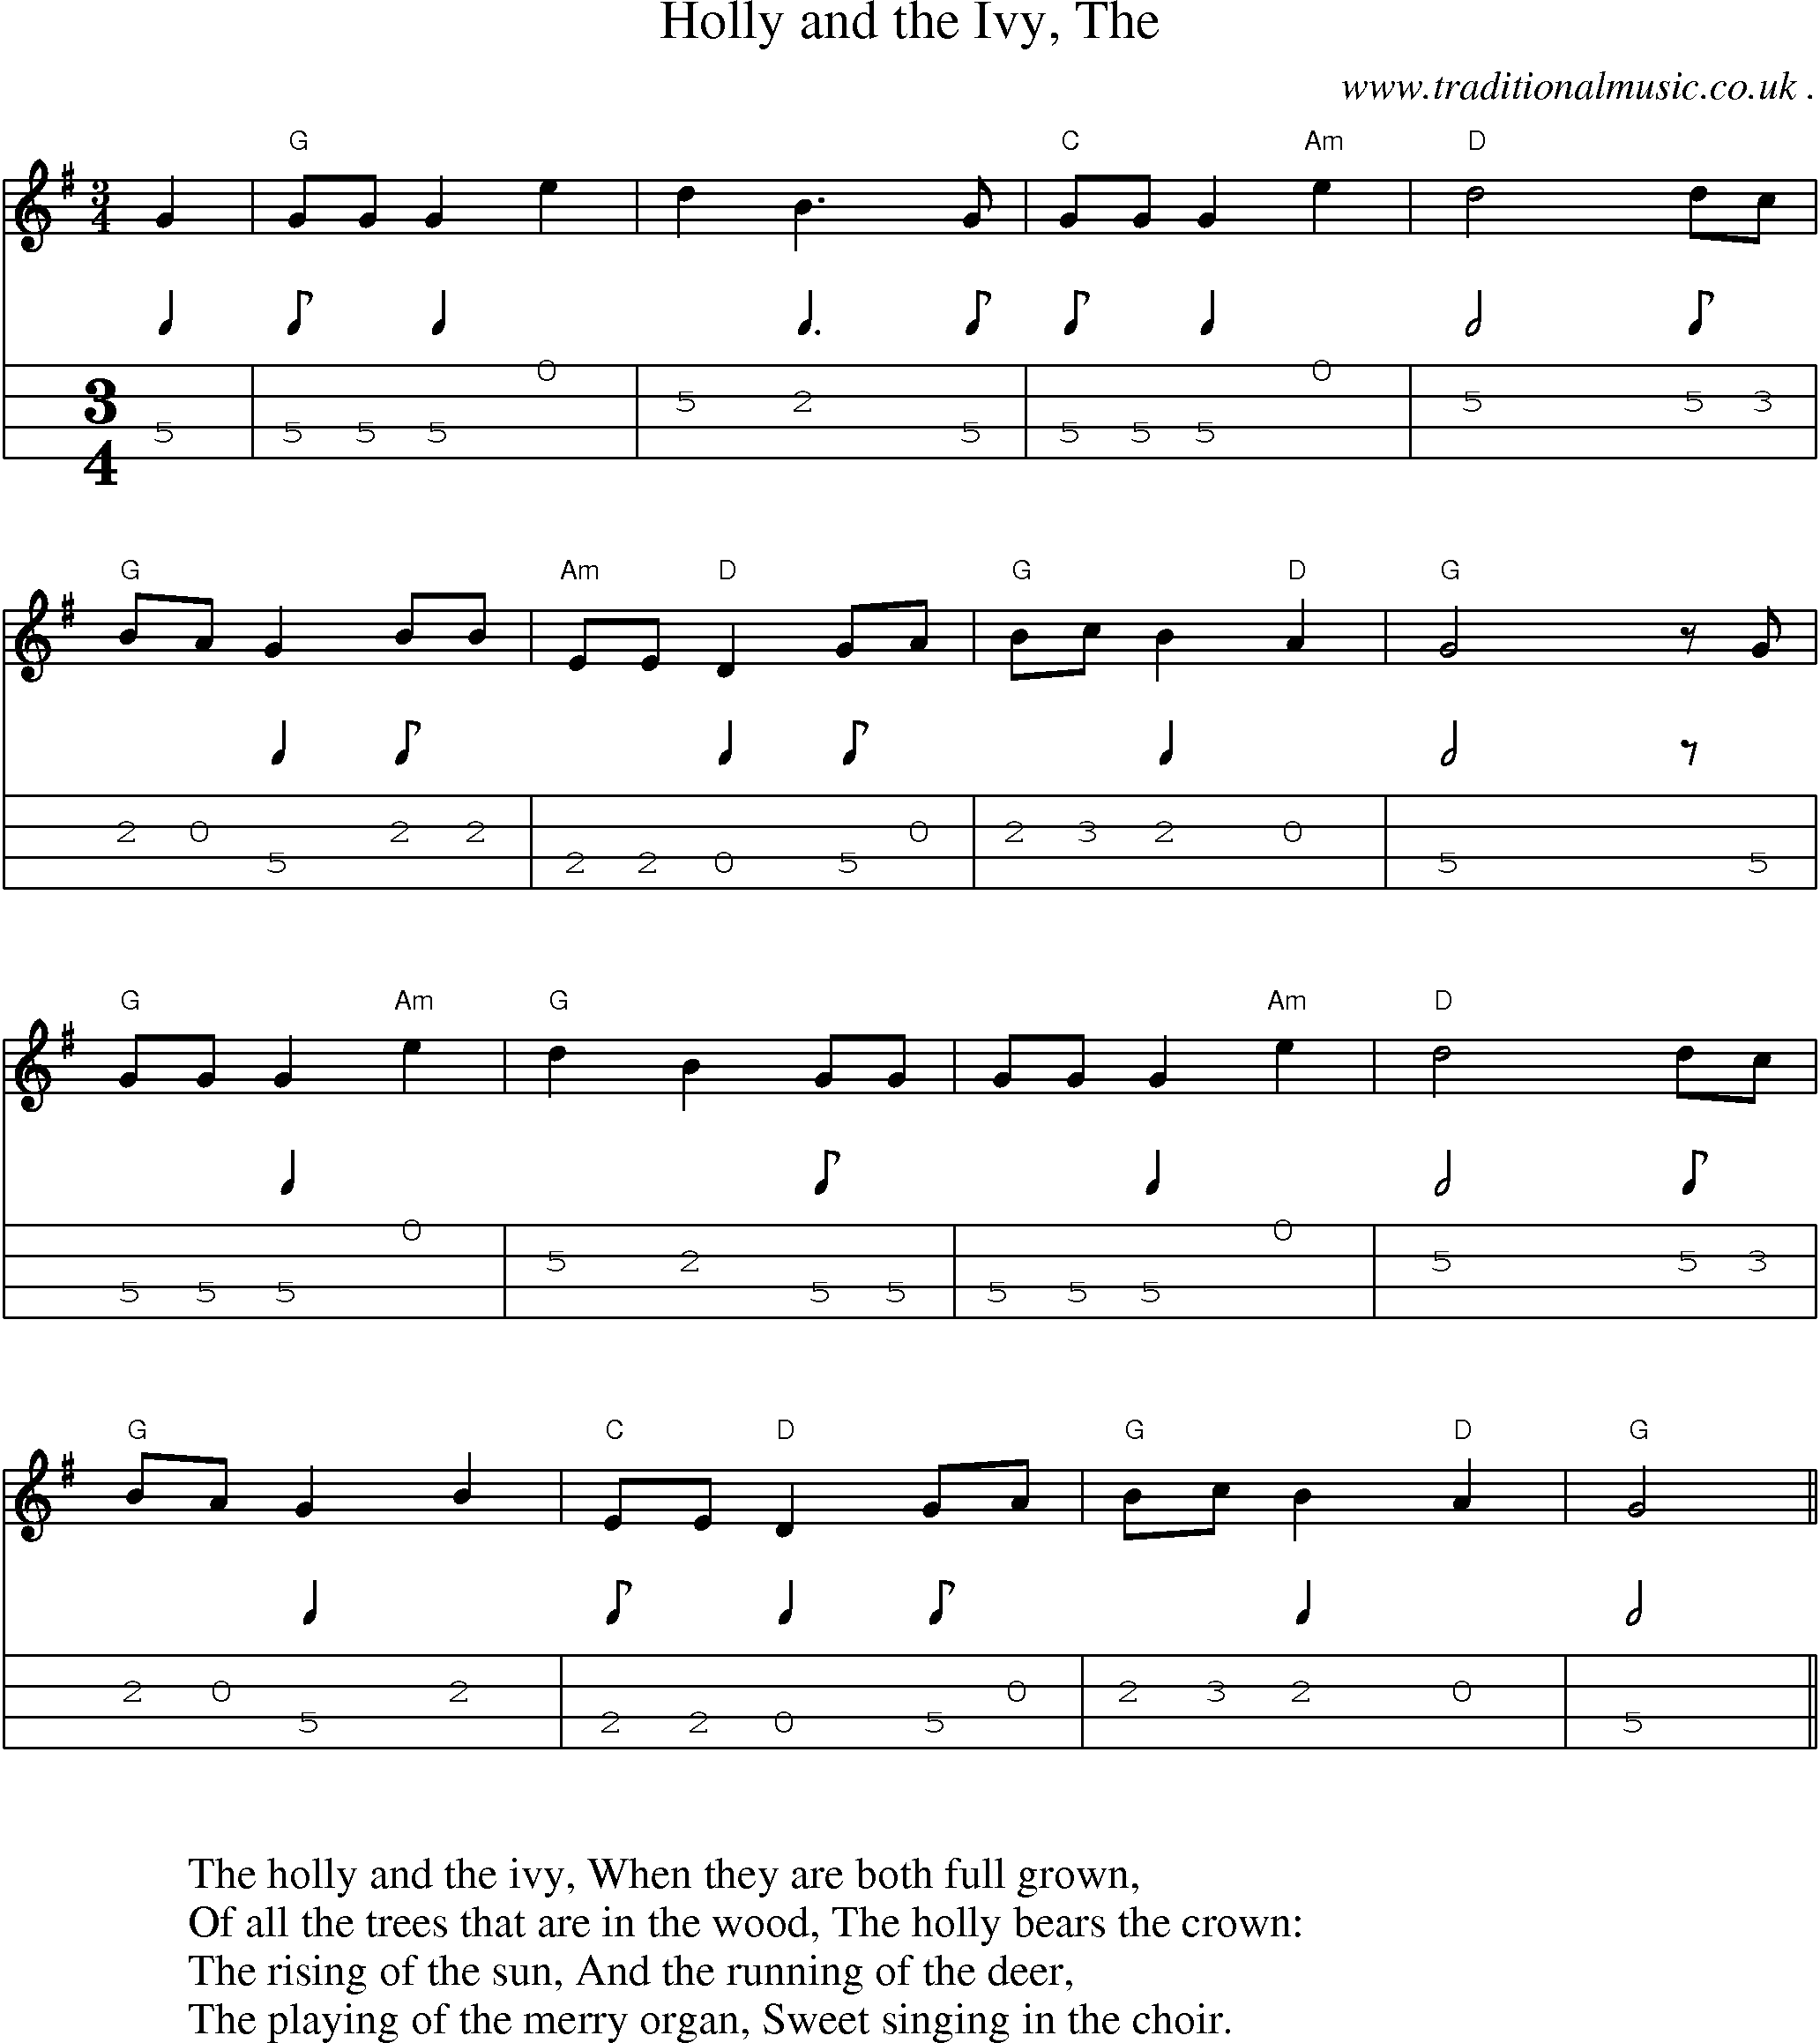 Music Score and Guitar Tabs for Holly and the Ivy The